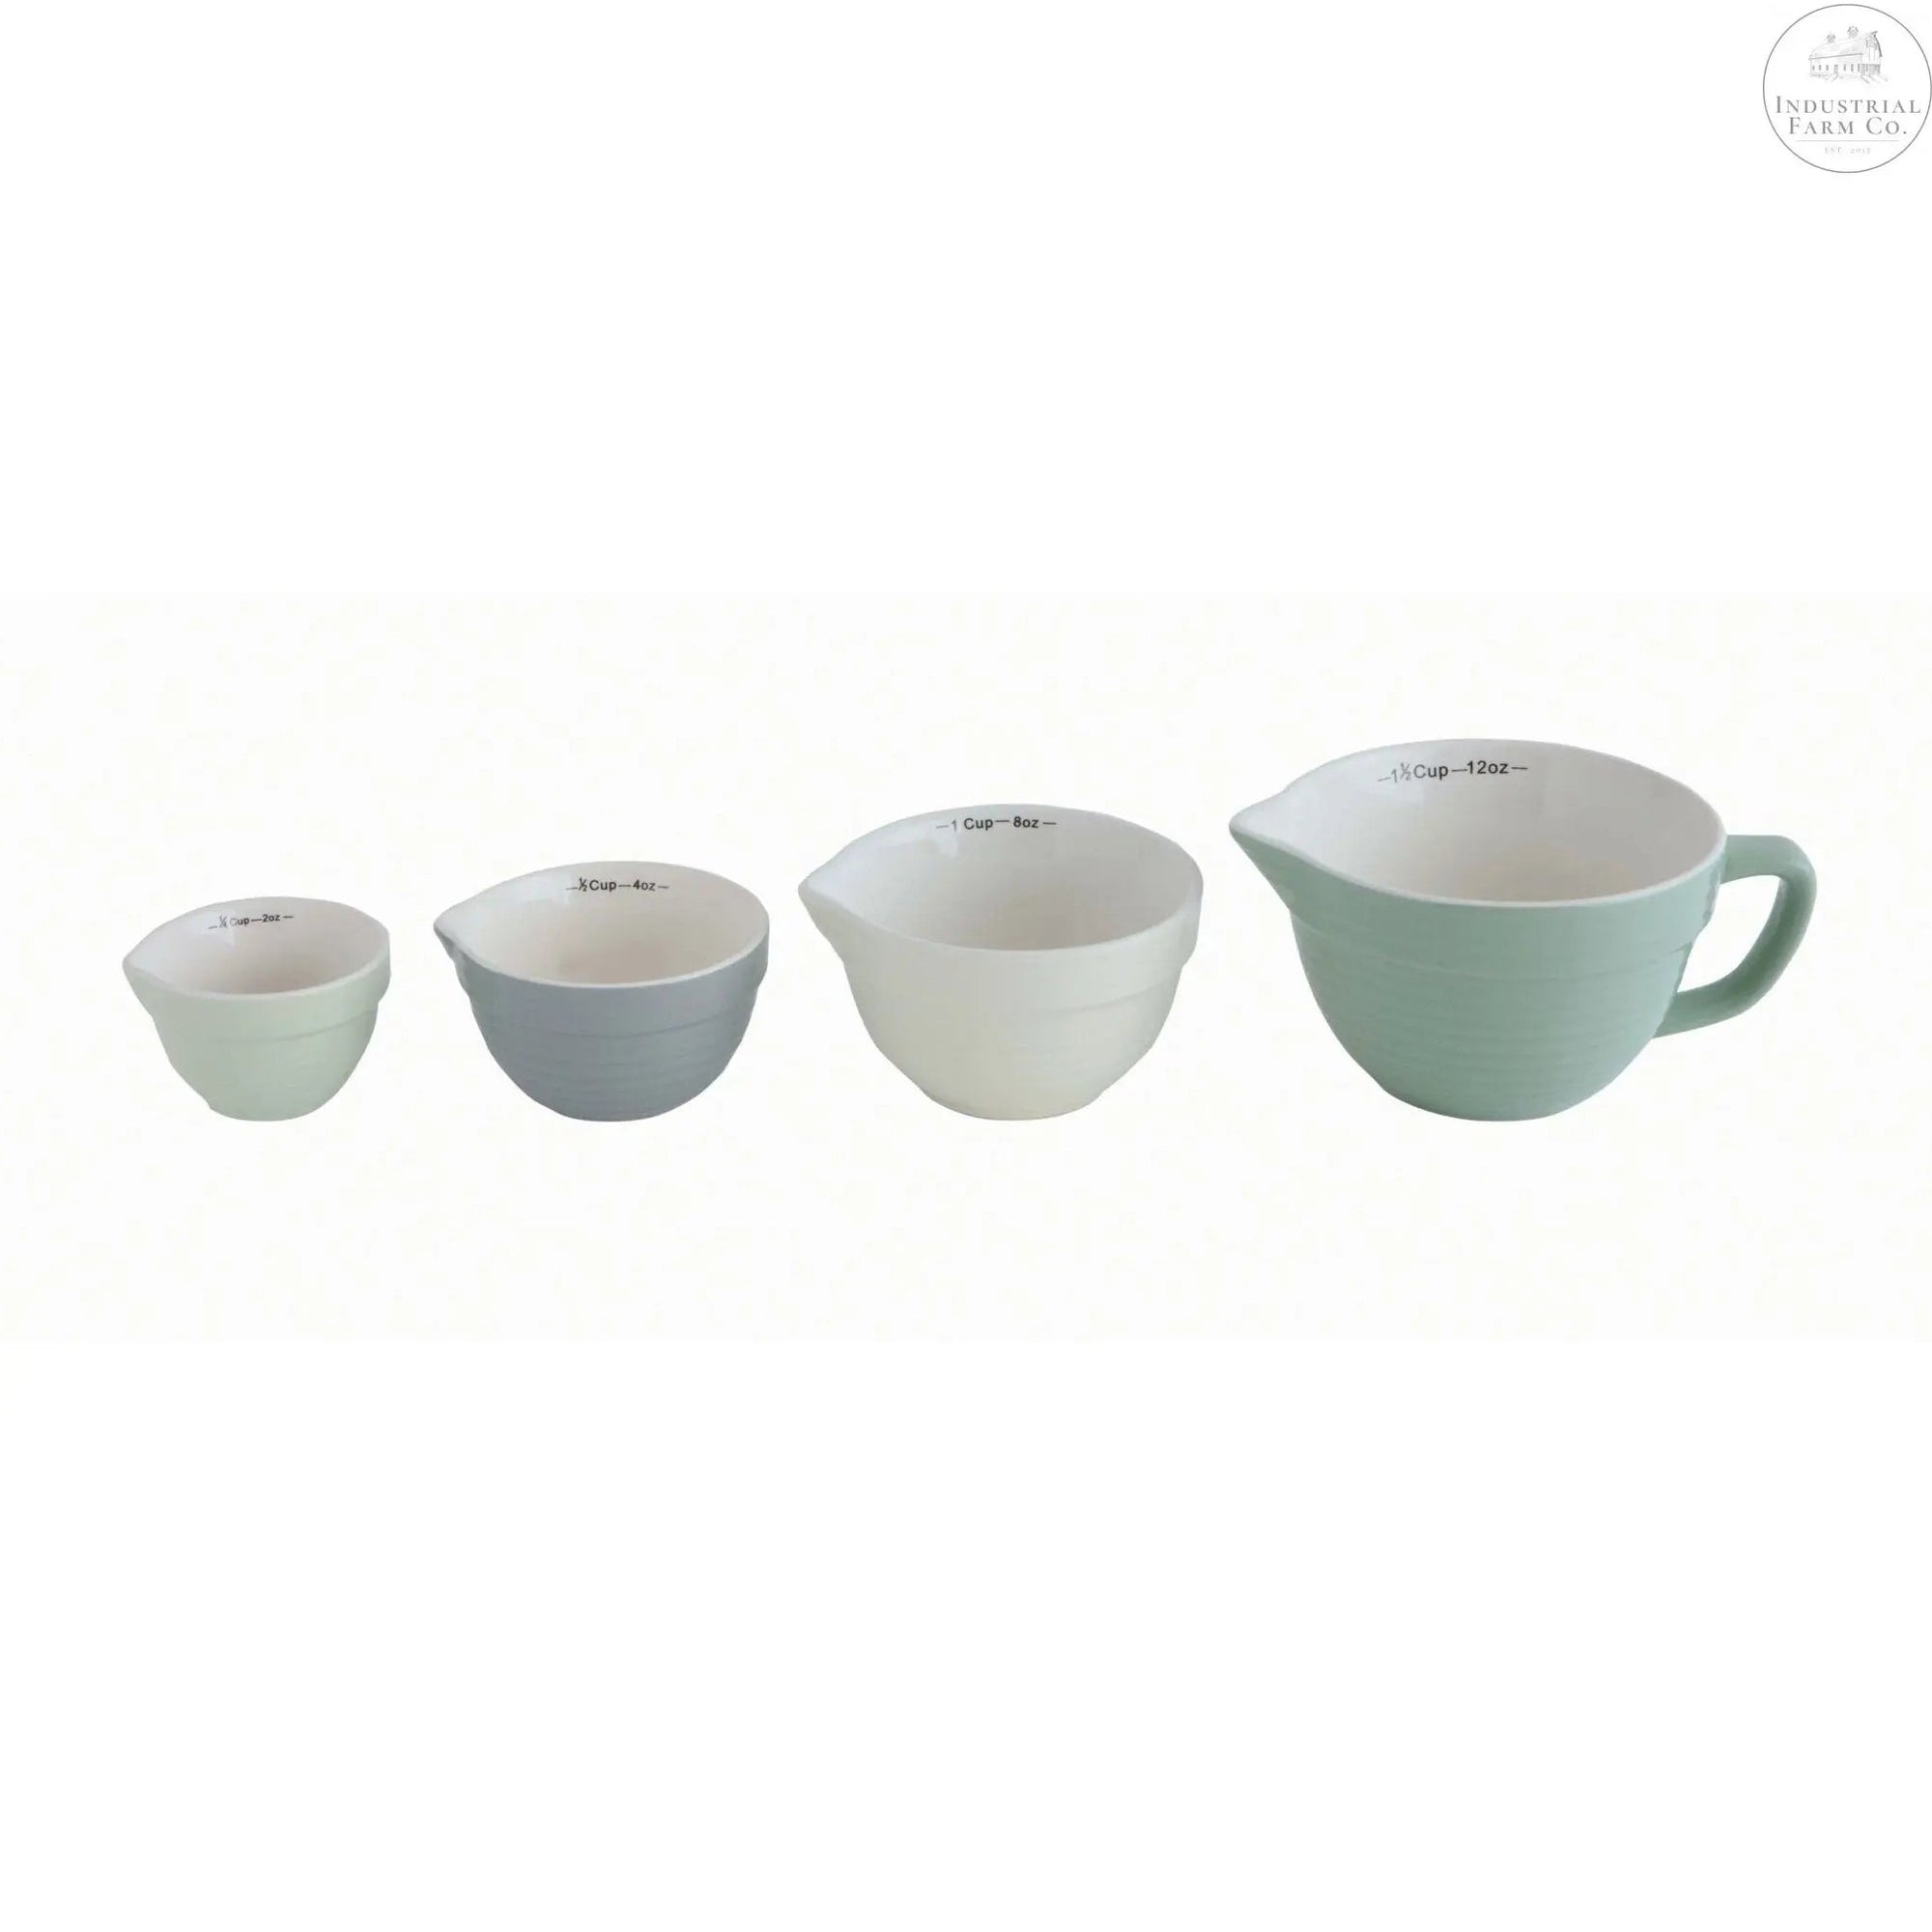 Stoneware Measuring Cups, Set of 4